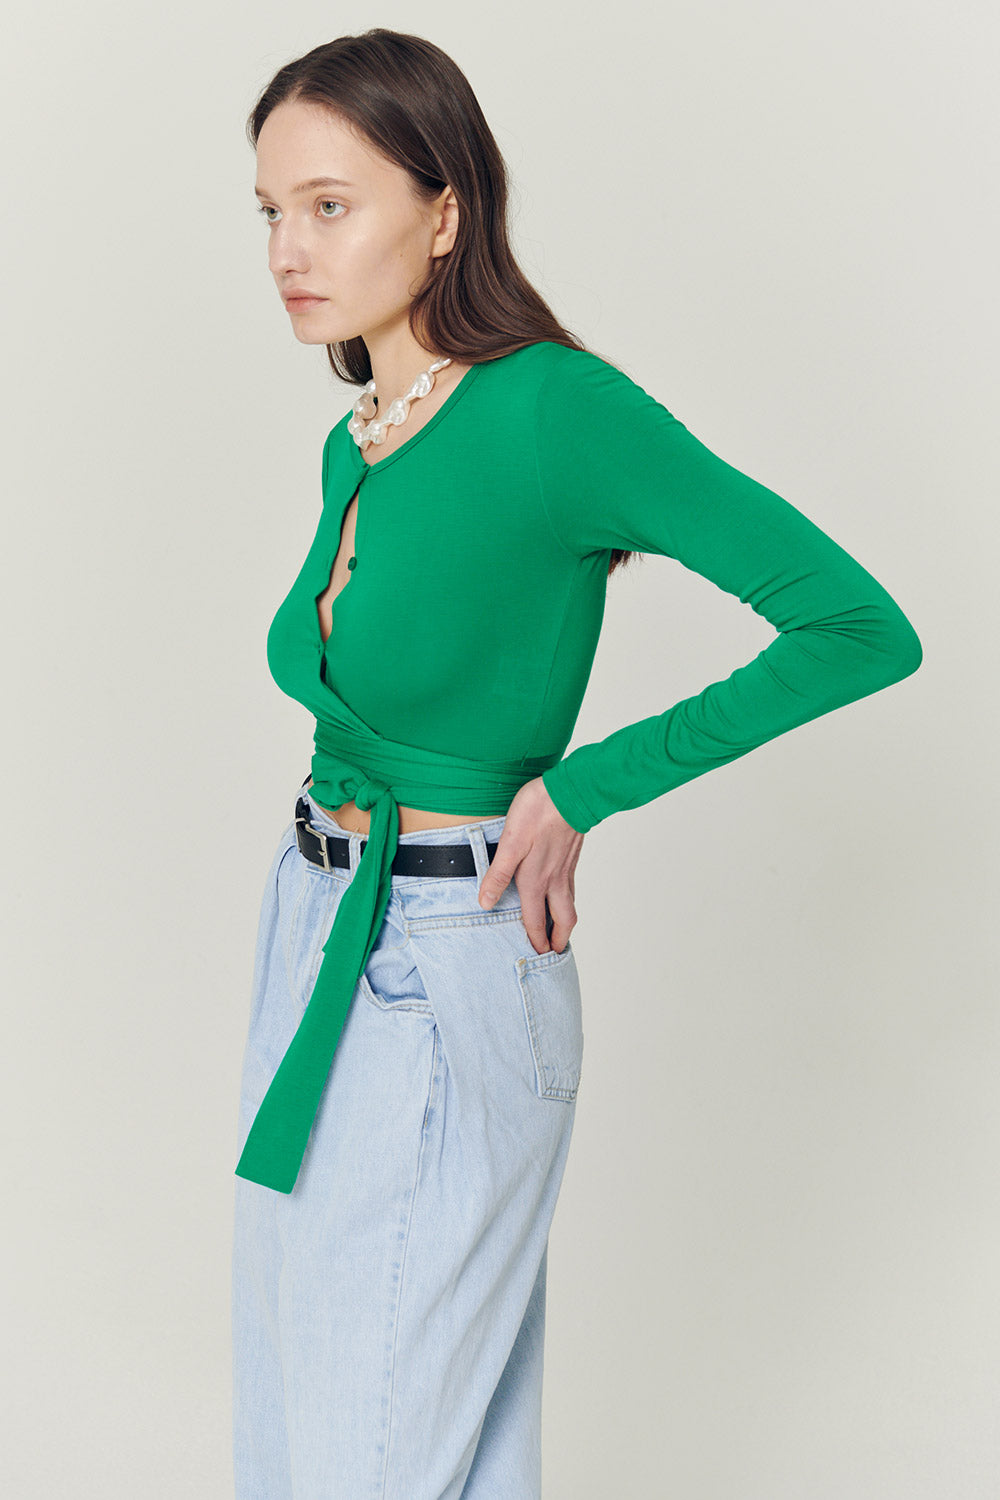 STORETS.us Mely Buttoned Wrap Top